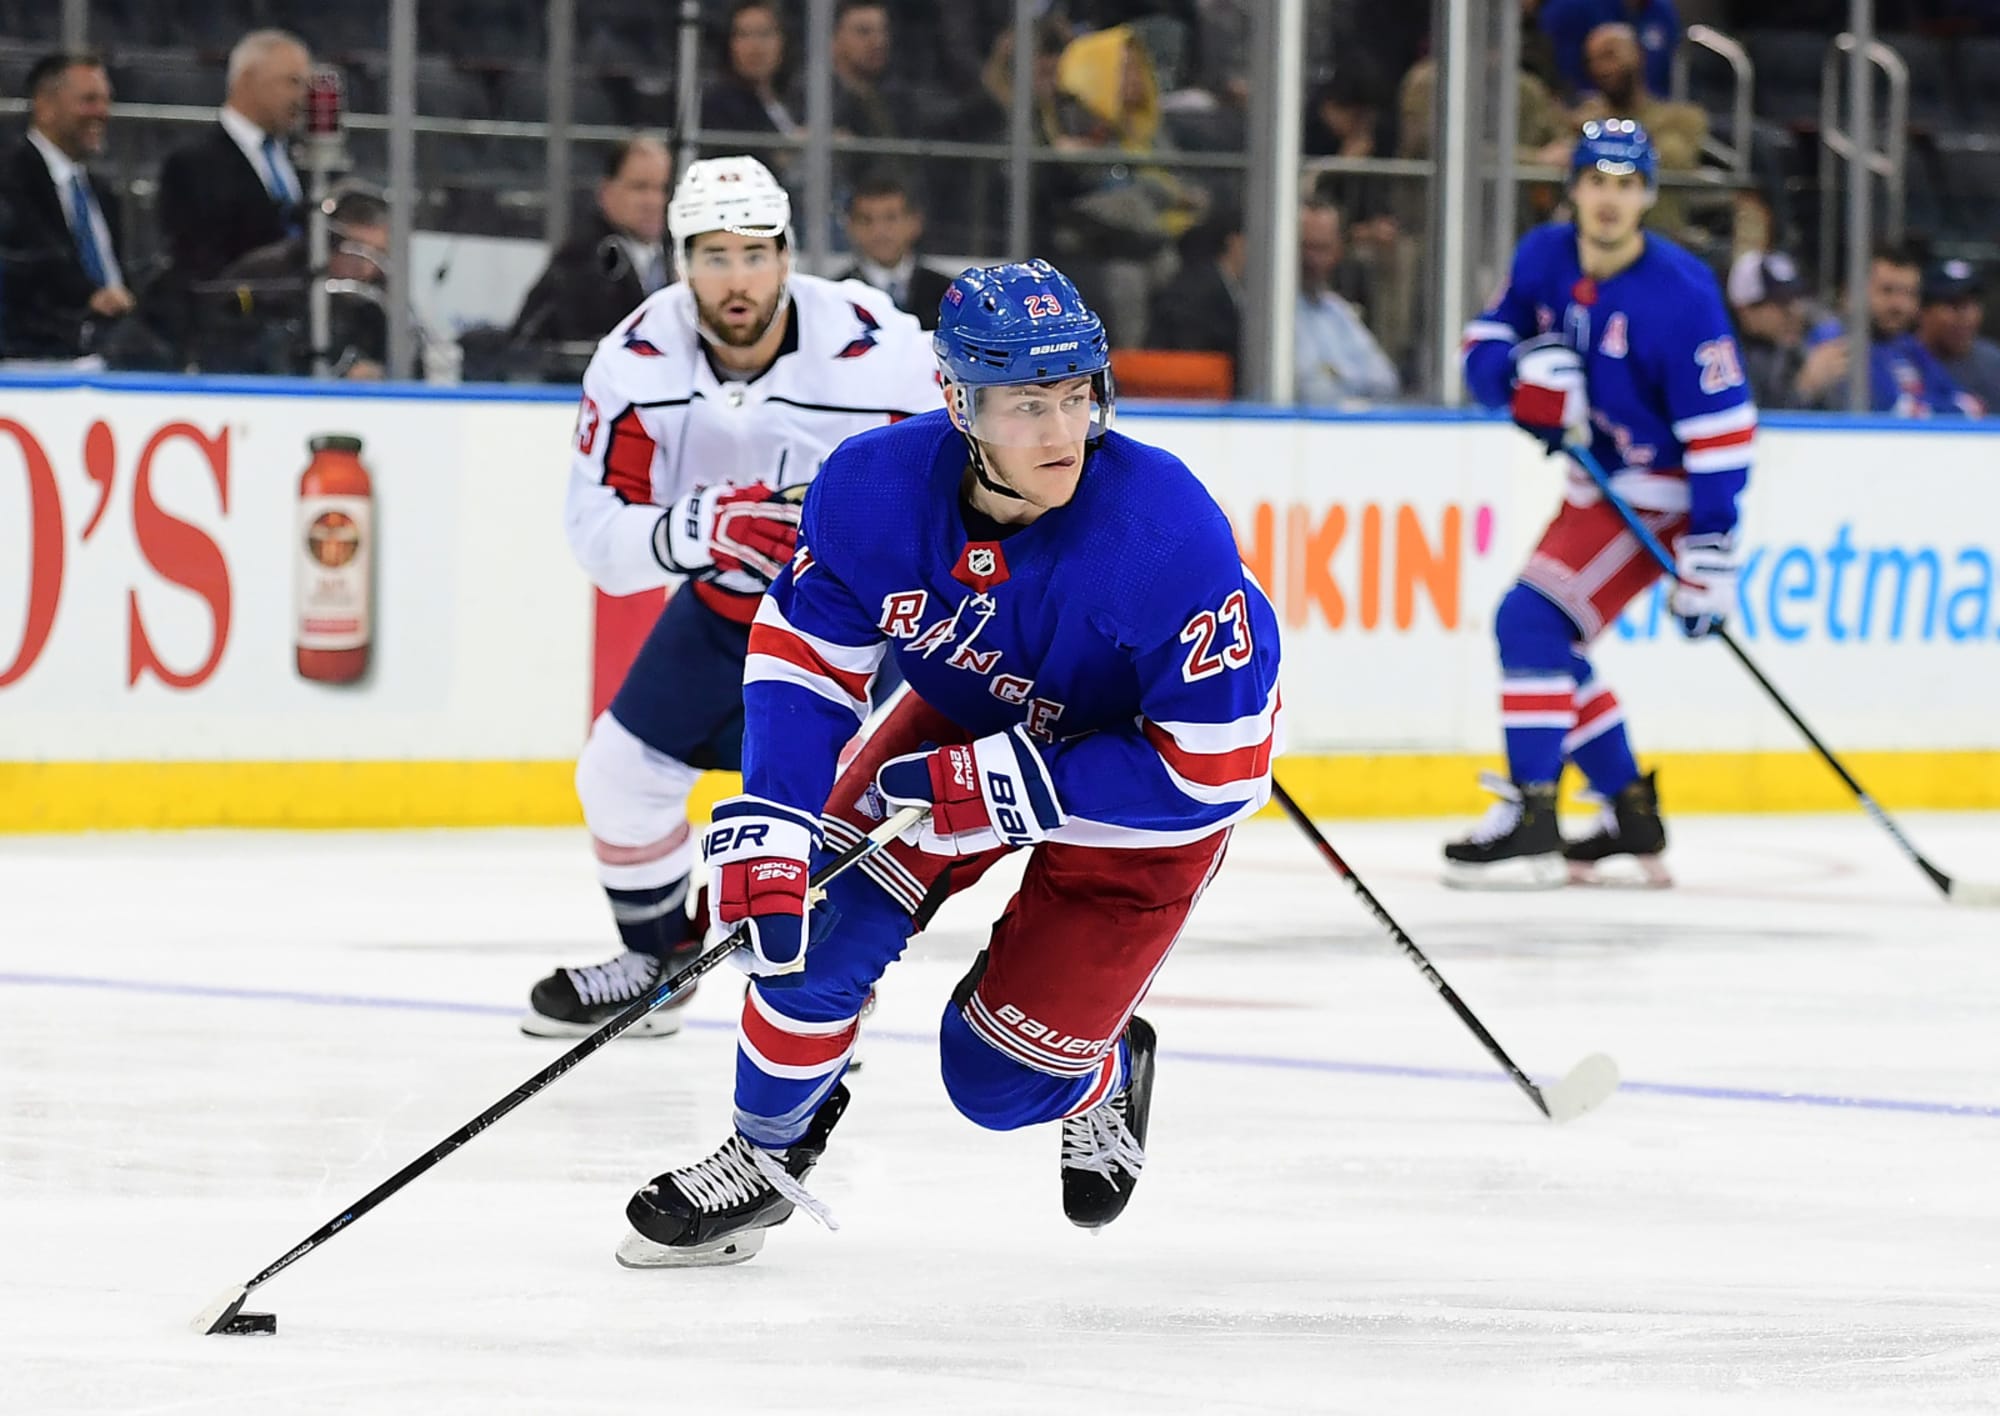 New York Rangers playoff picture Ground lost and a big match up tonight